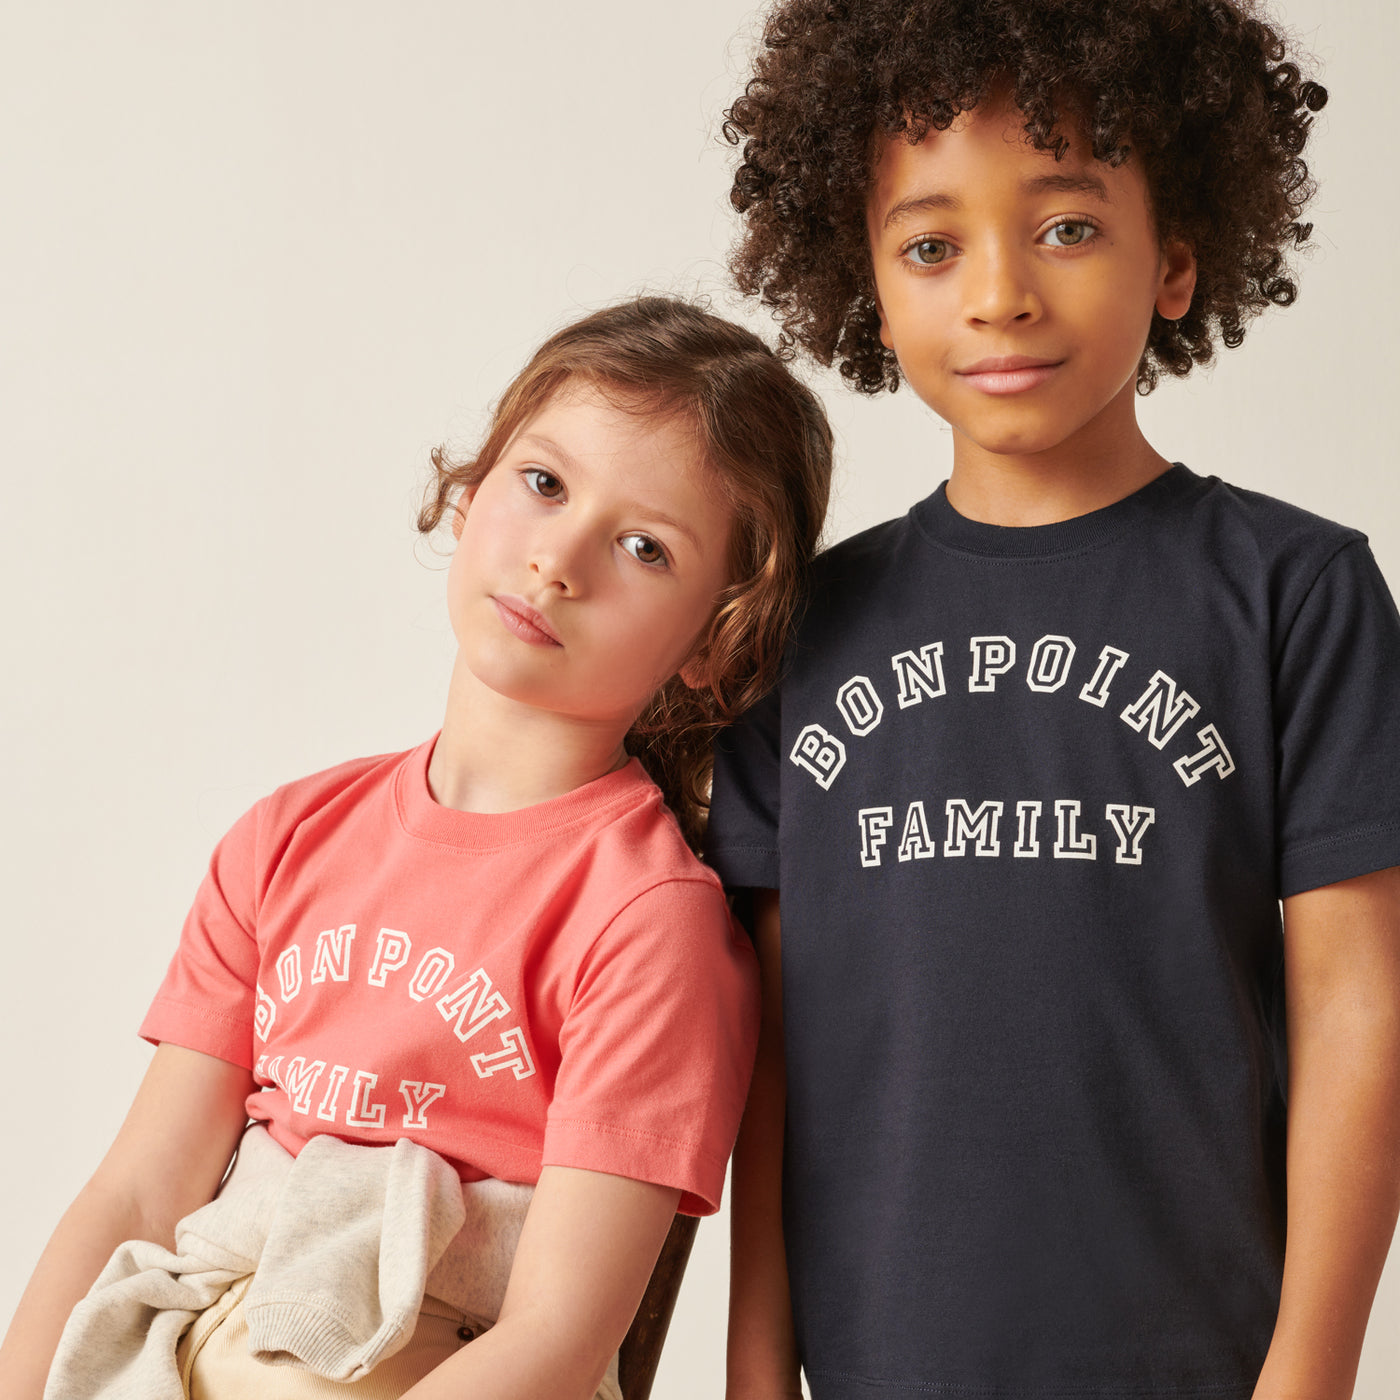 Girl and boy in Bonpoint Family shirts from Bonpoint Pre-Fall 2022 Collection